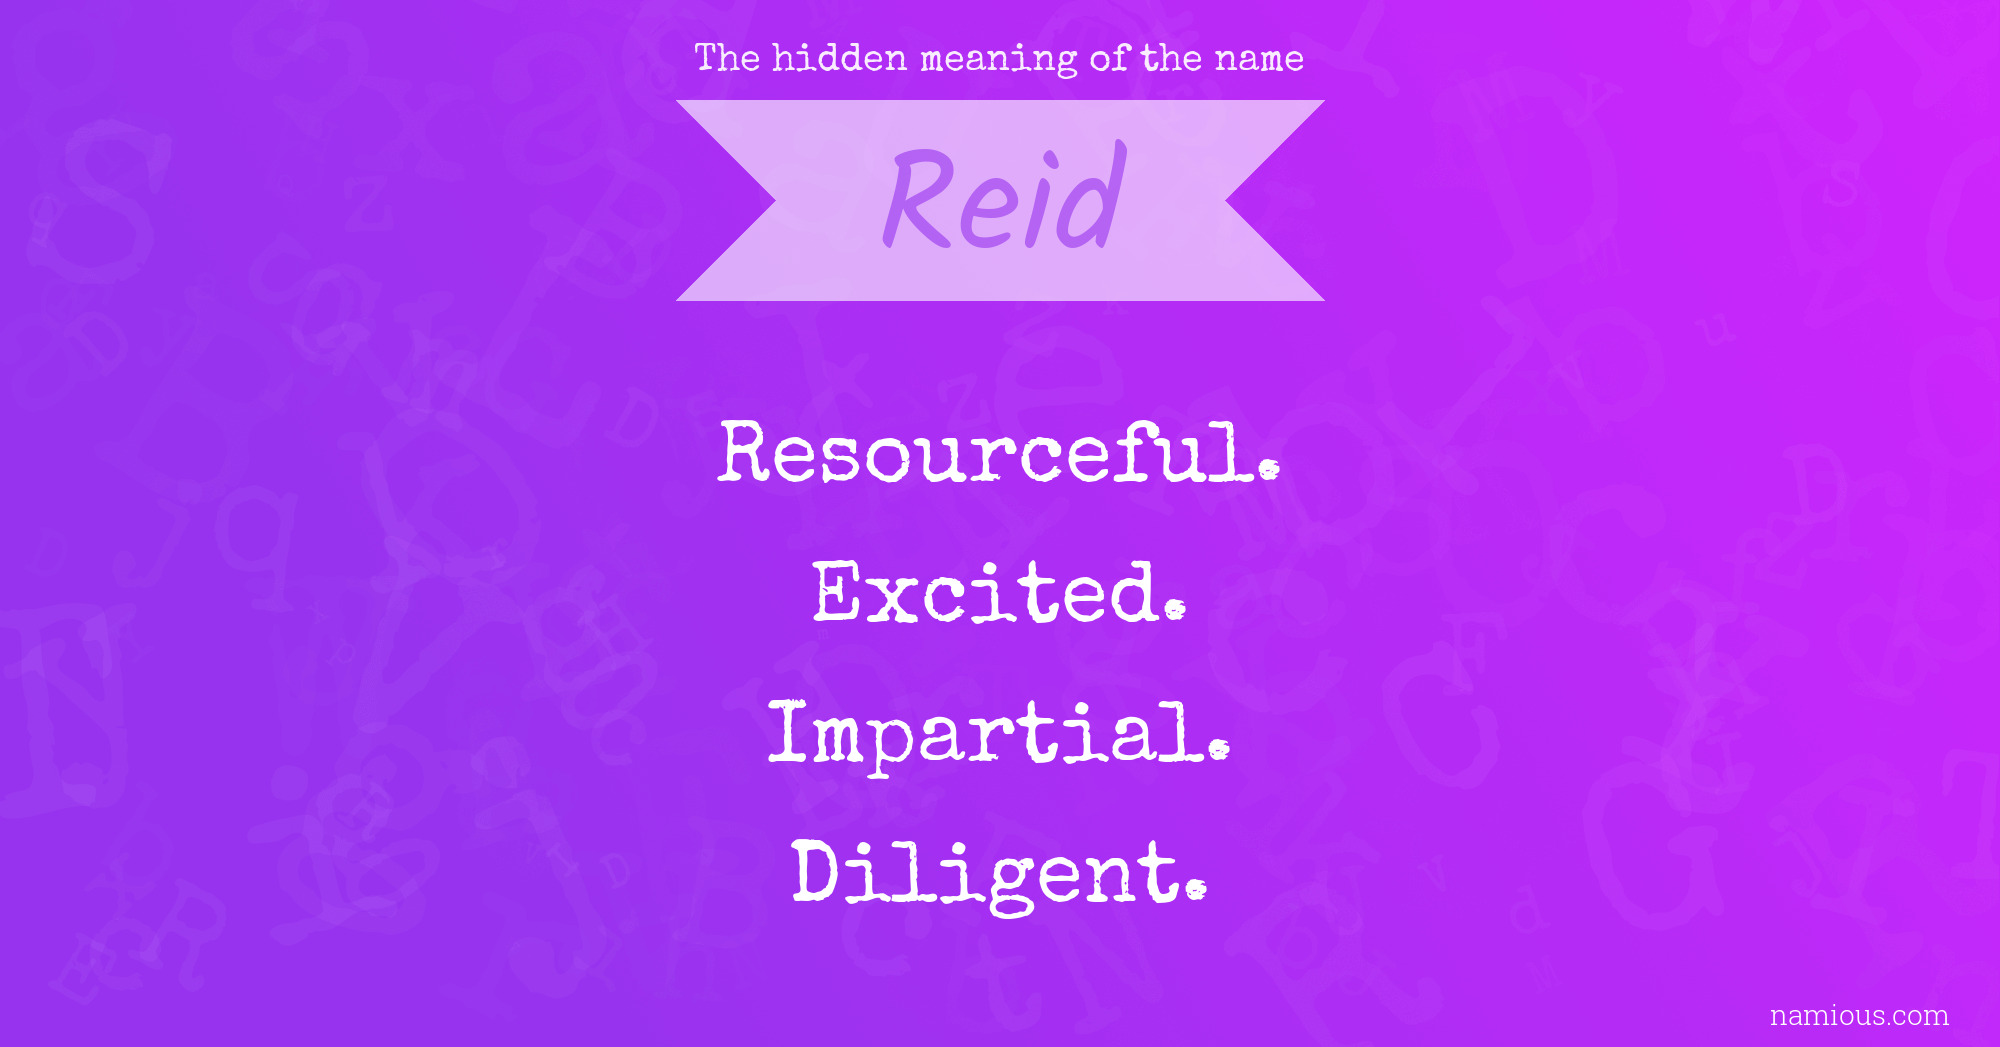 The hidden meaning of the name Reid